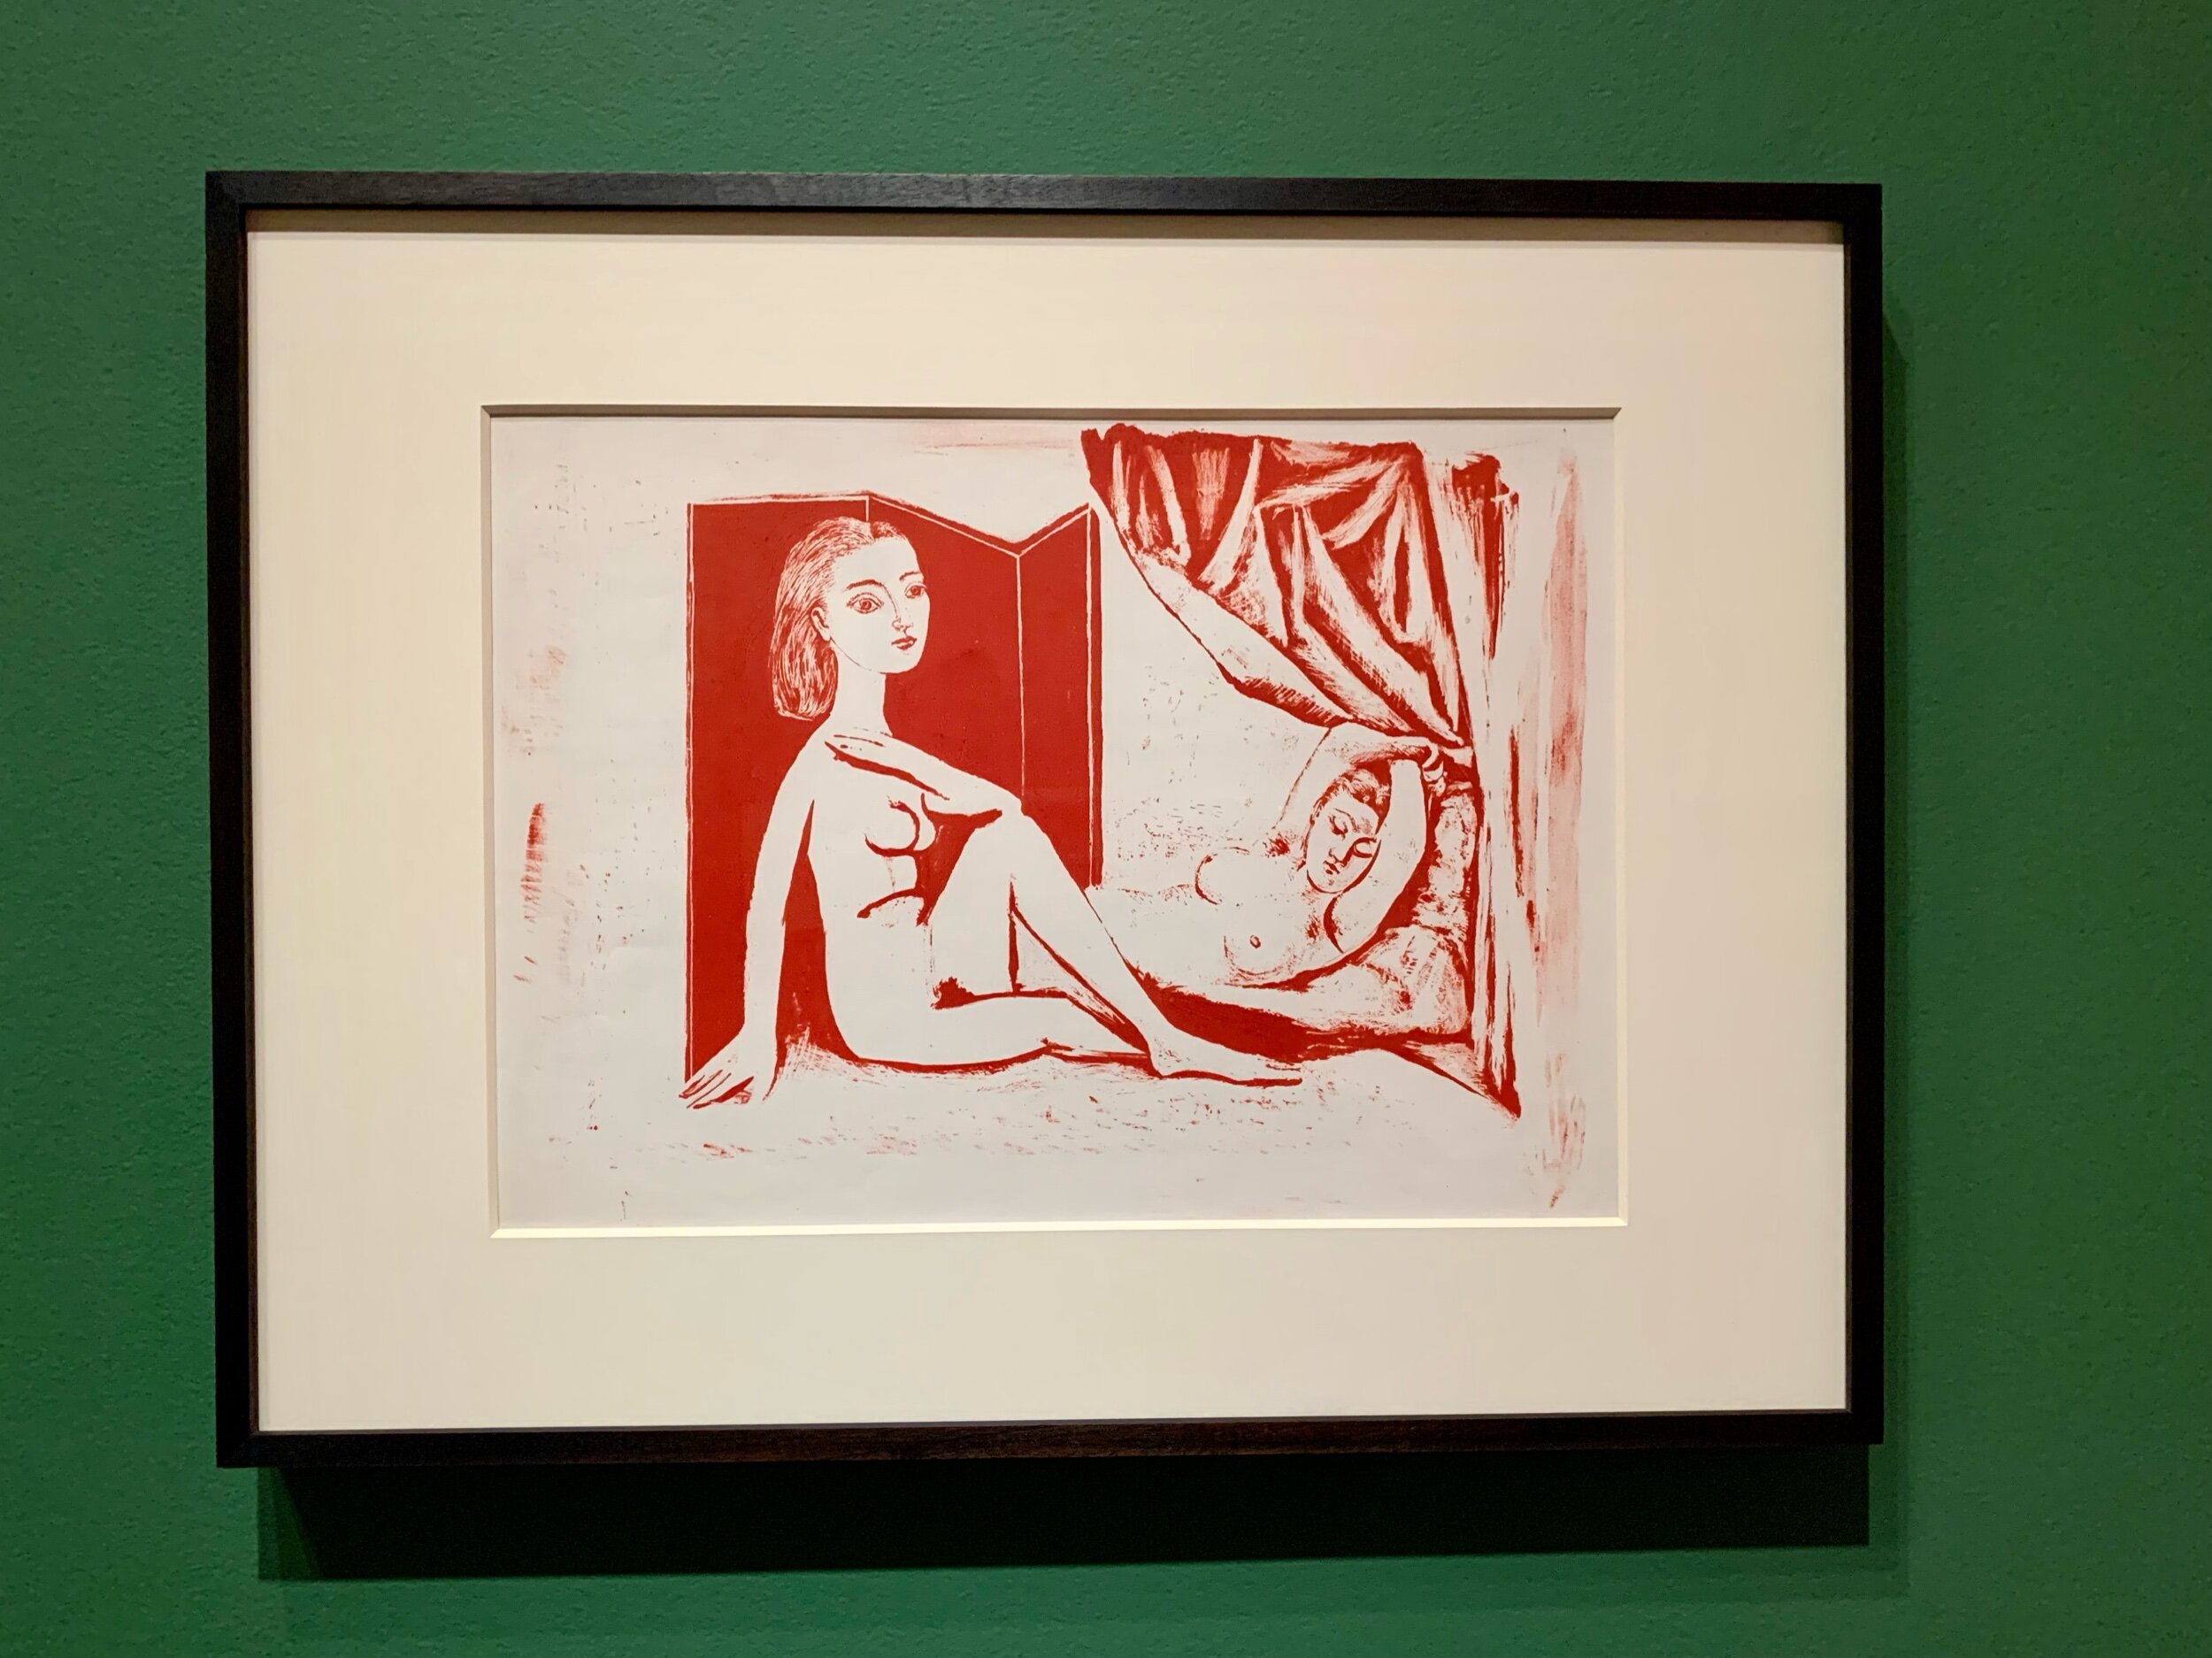    Two Nude Women,  1946, Lithograph  